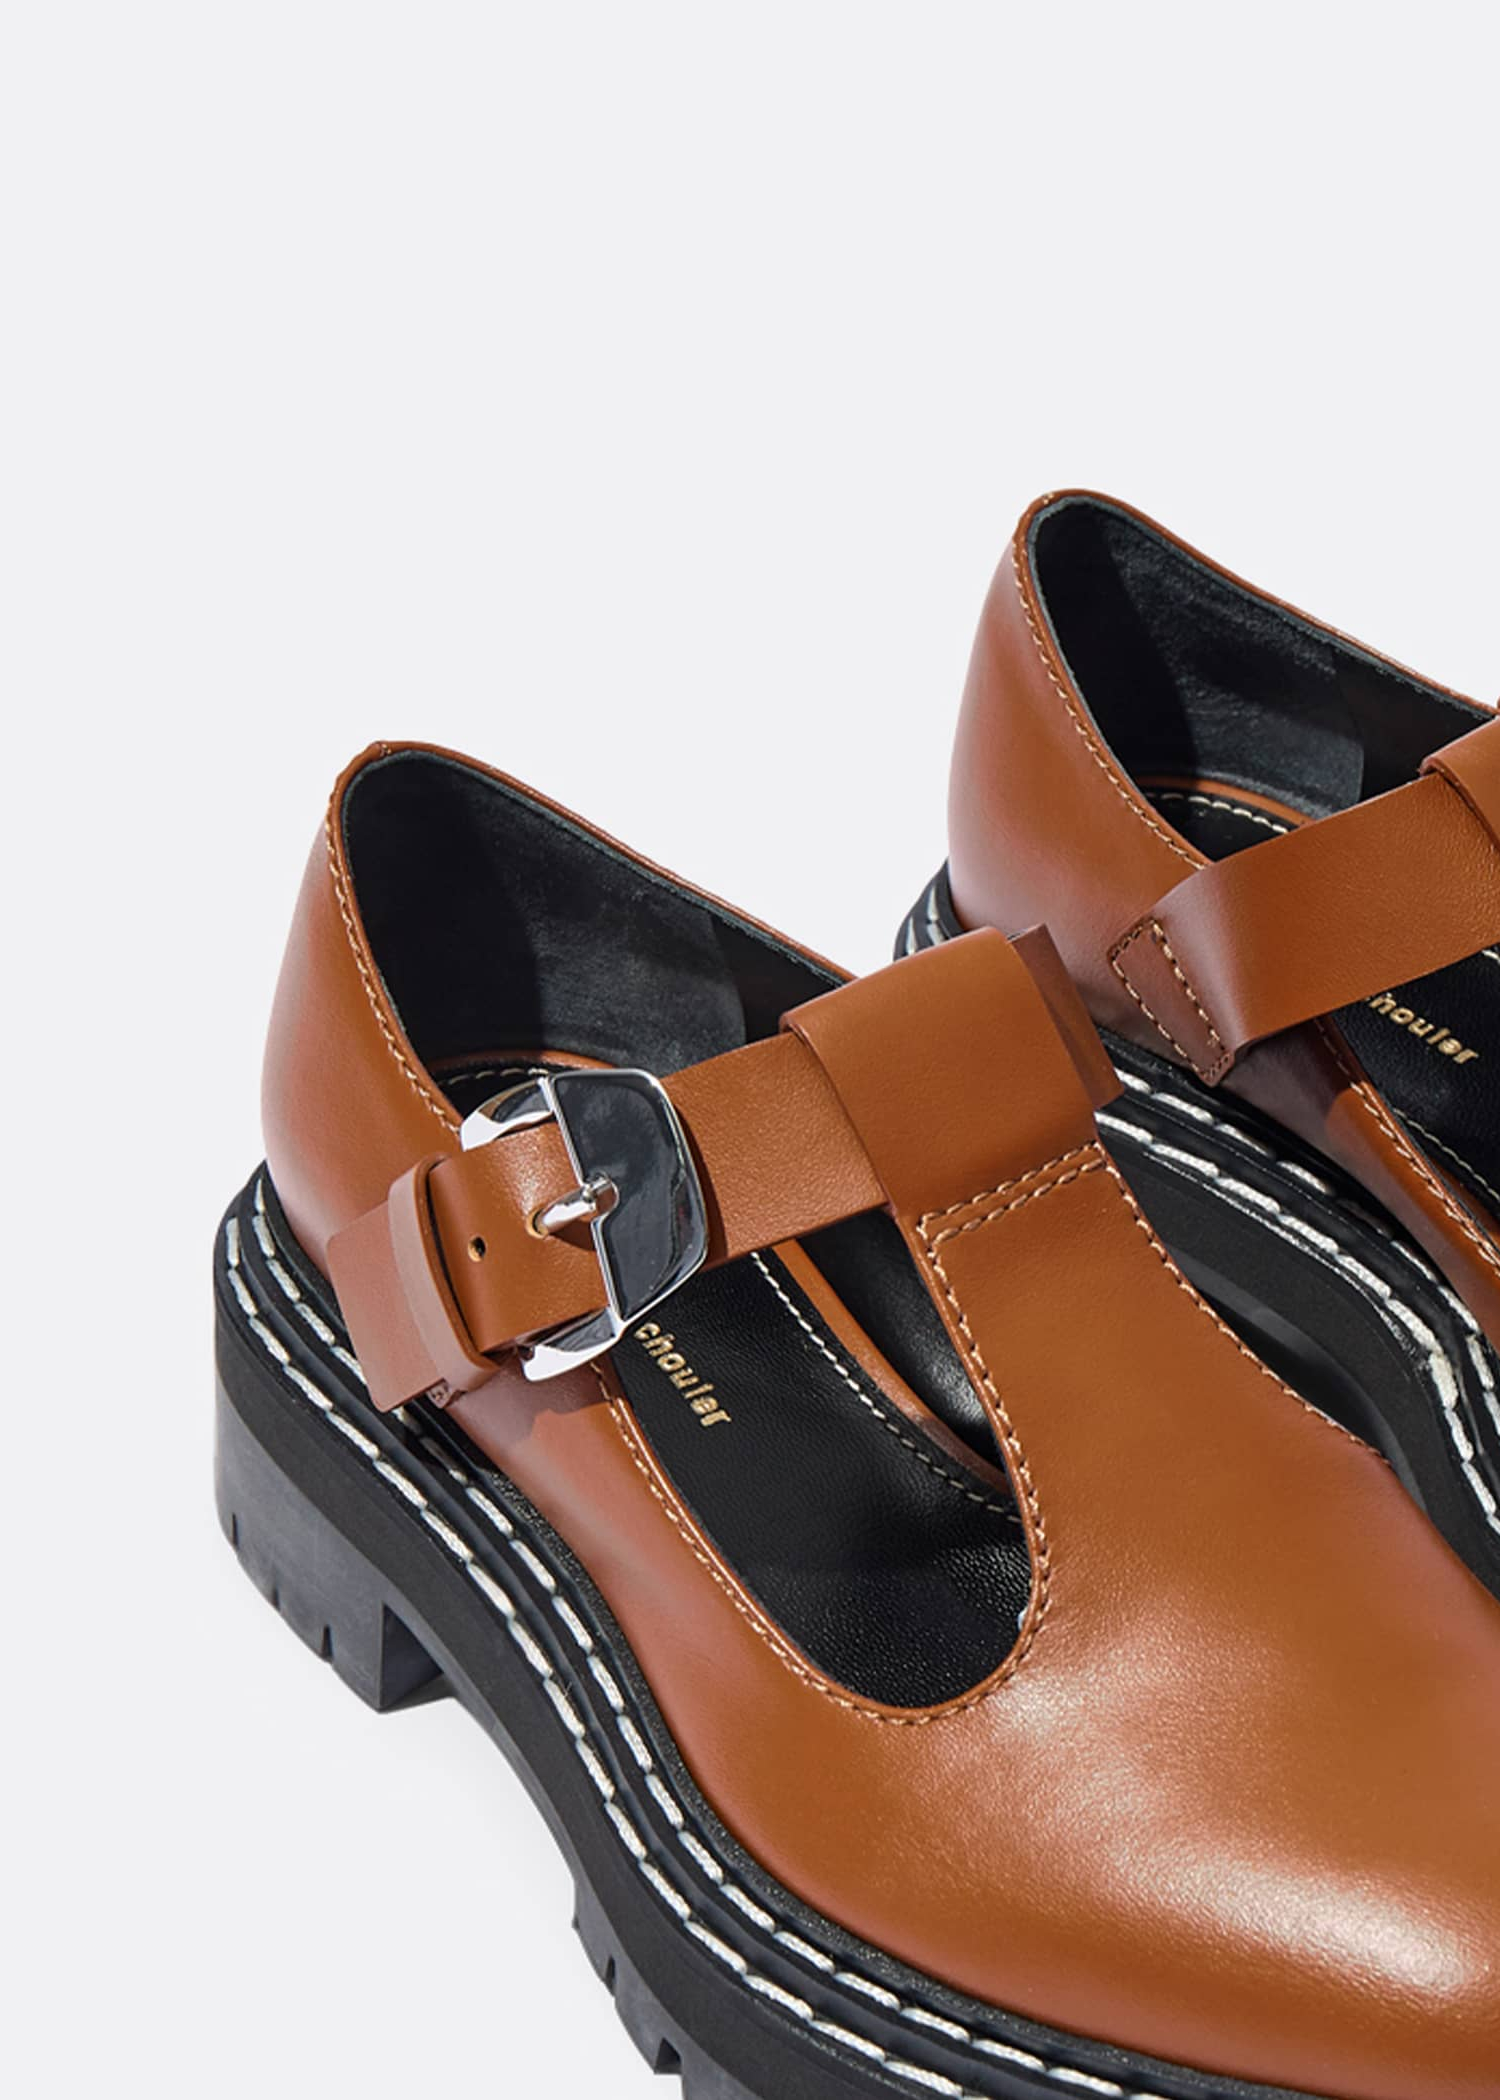 Proenza Schouler Lug Sole Mary Jane Loafer